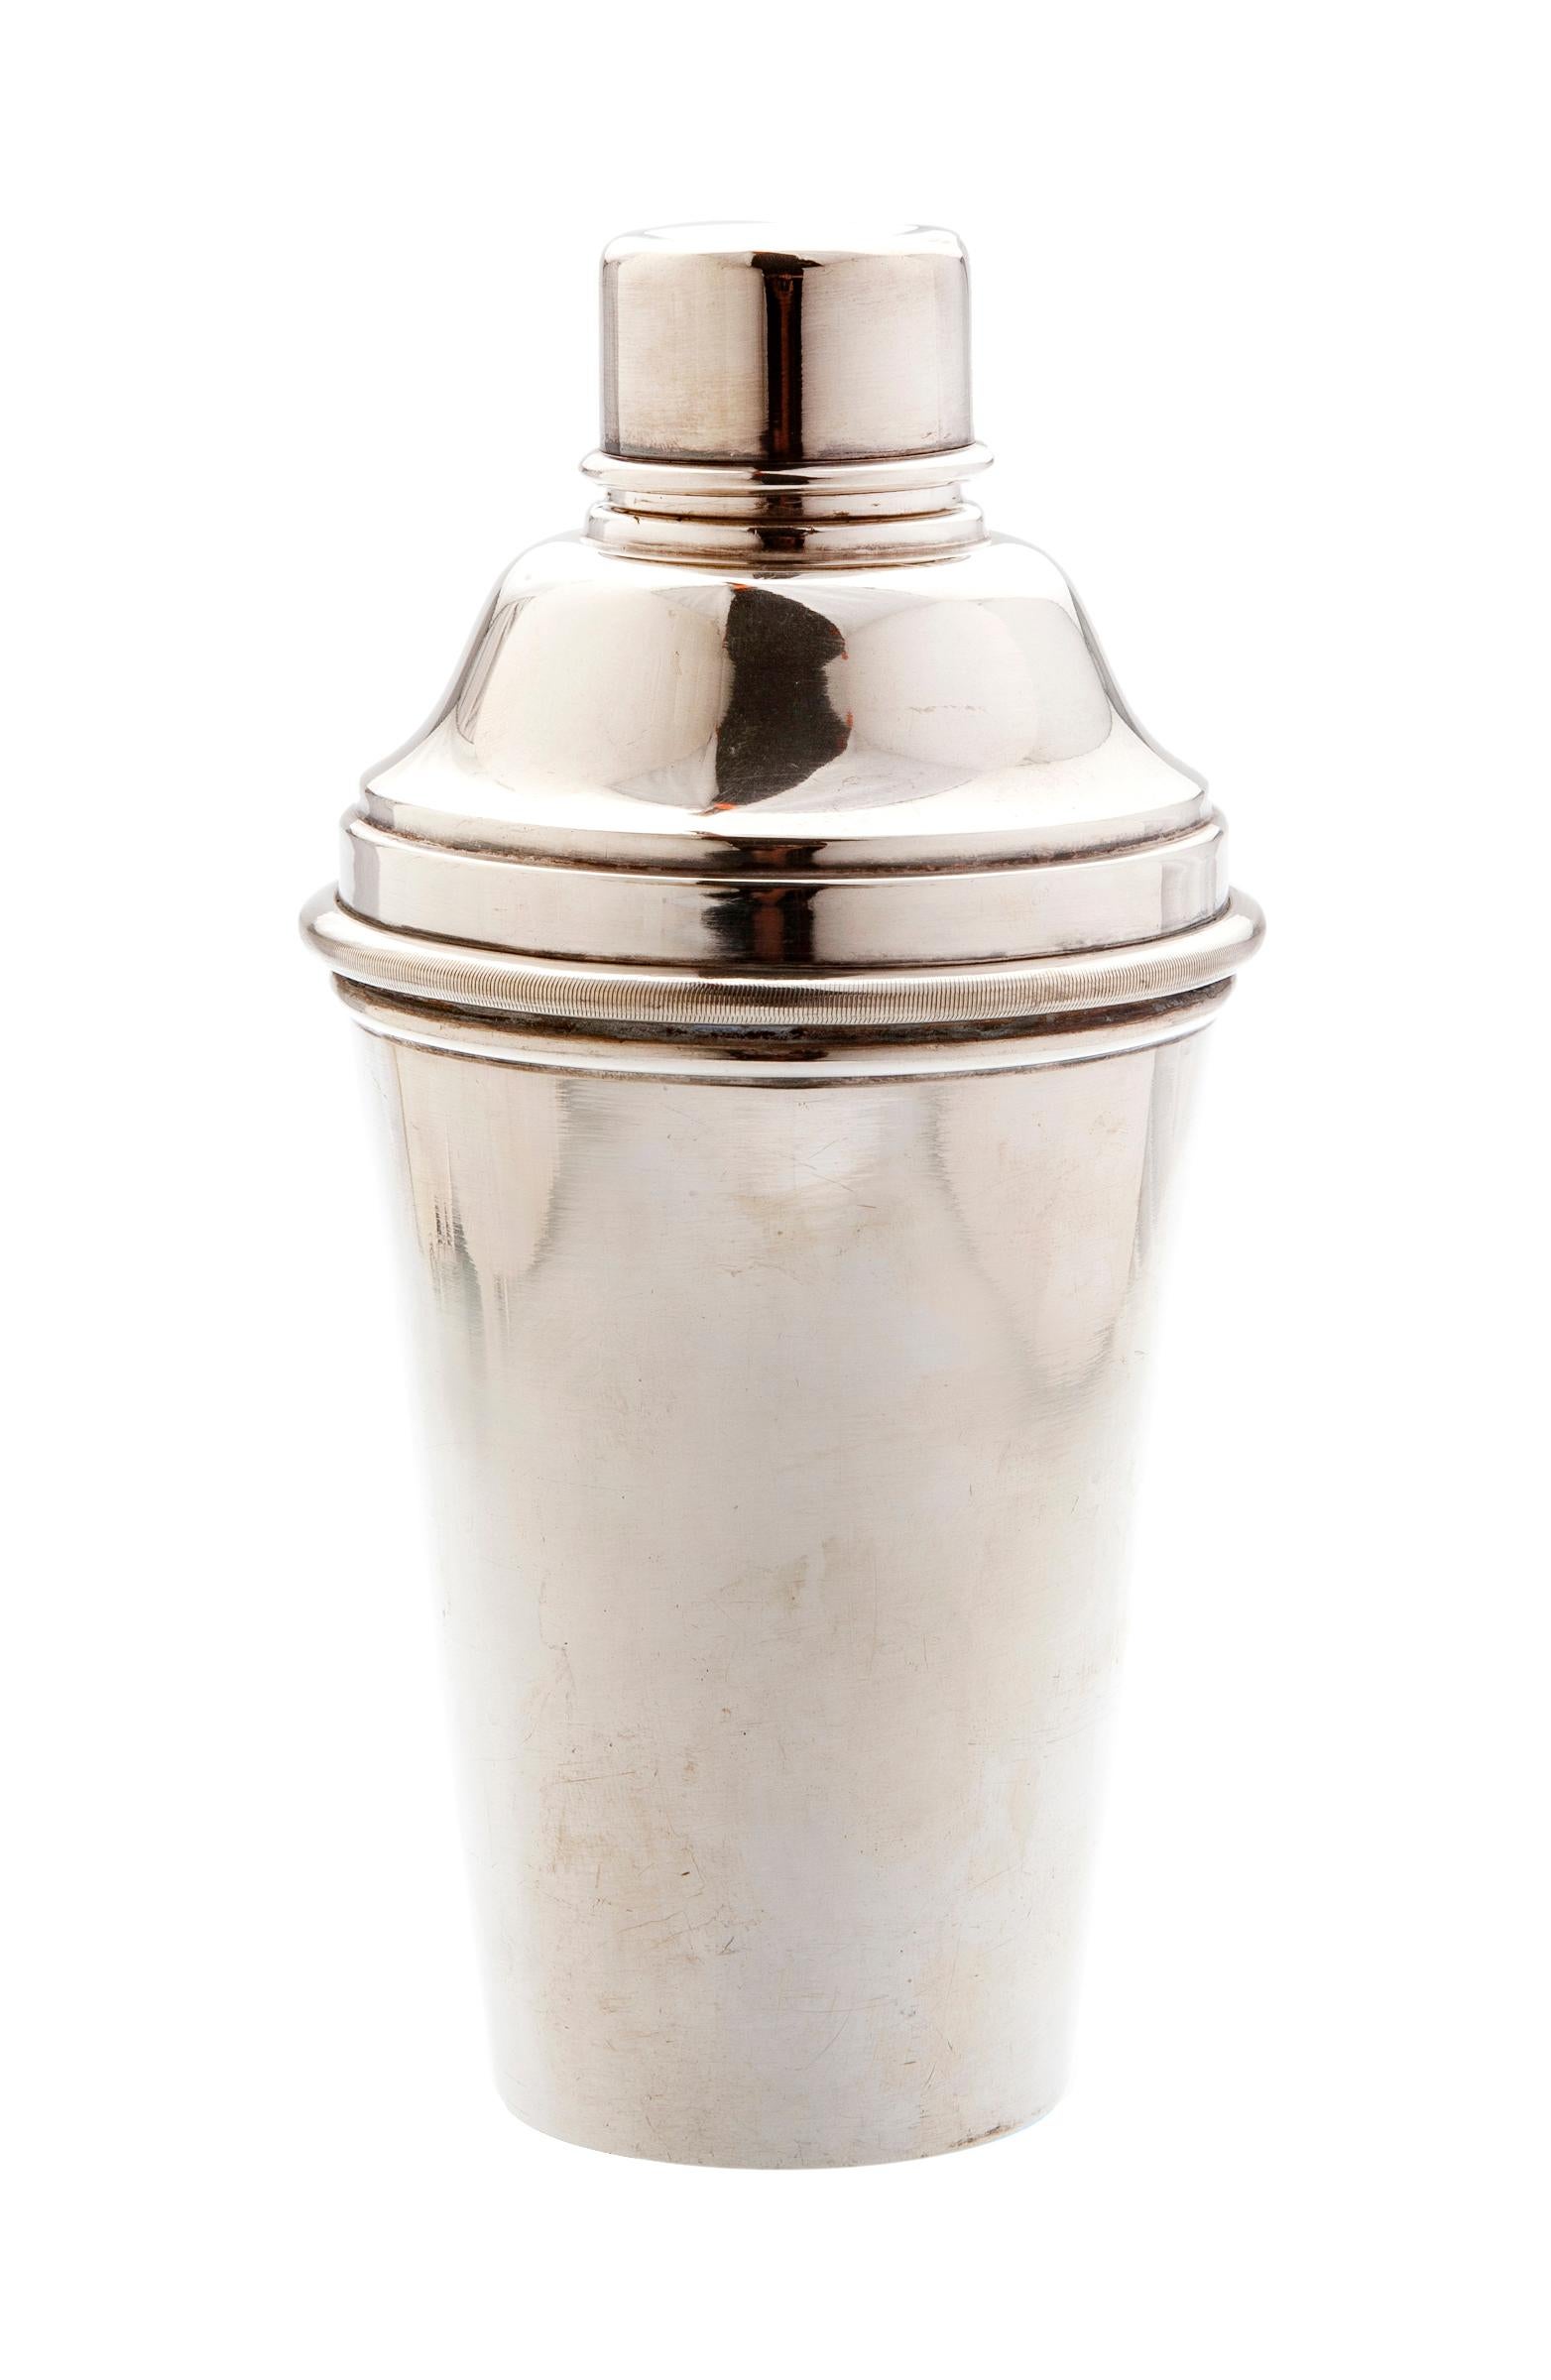 Art Deco /Early Modern European martini shaker in silver-plate featuring a cylindrical tapered body.
Small imprint, no name just mls35.